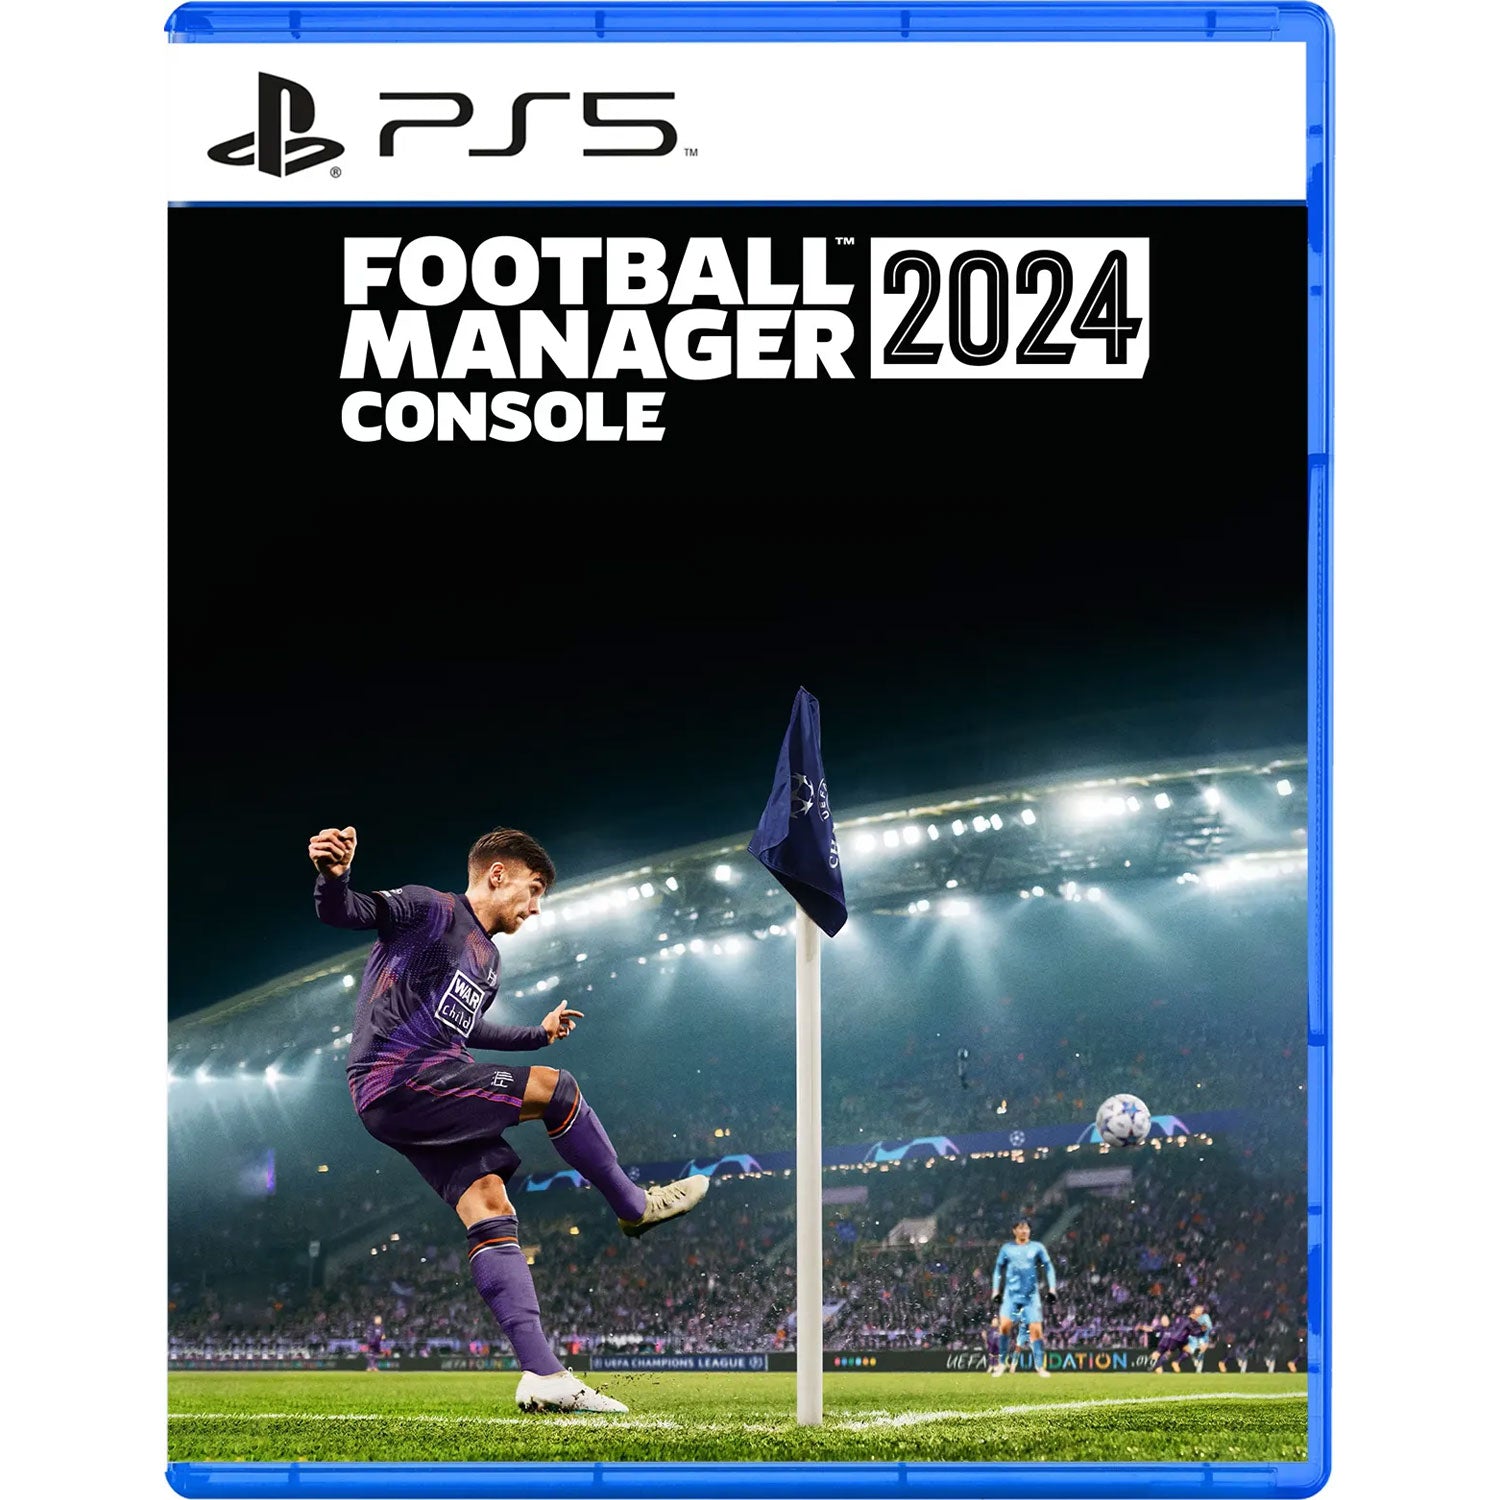 Football Manager 2024 Console, football manager 2022 ps4